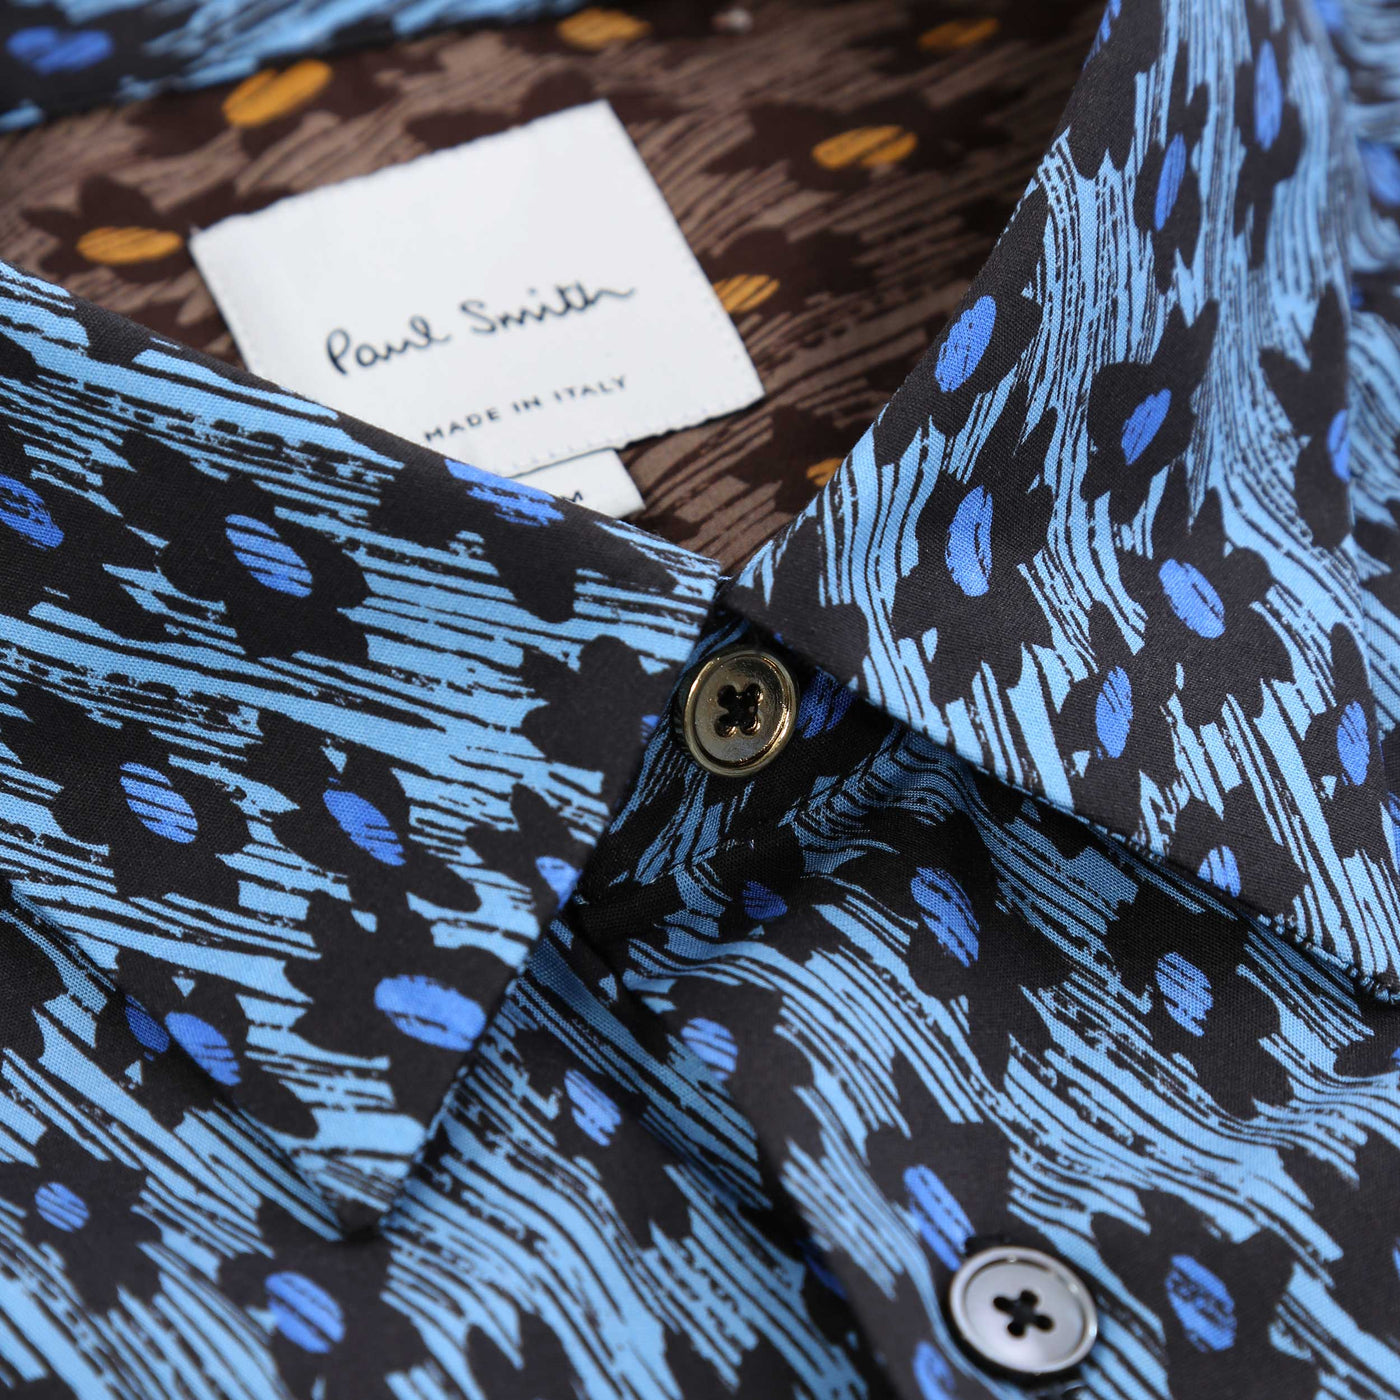 Paul Smith Flower Print Shirt in Blue Gold Top Button